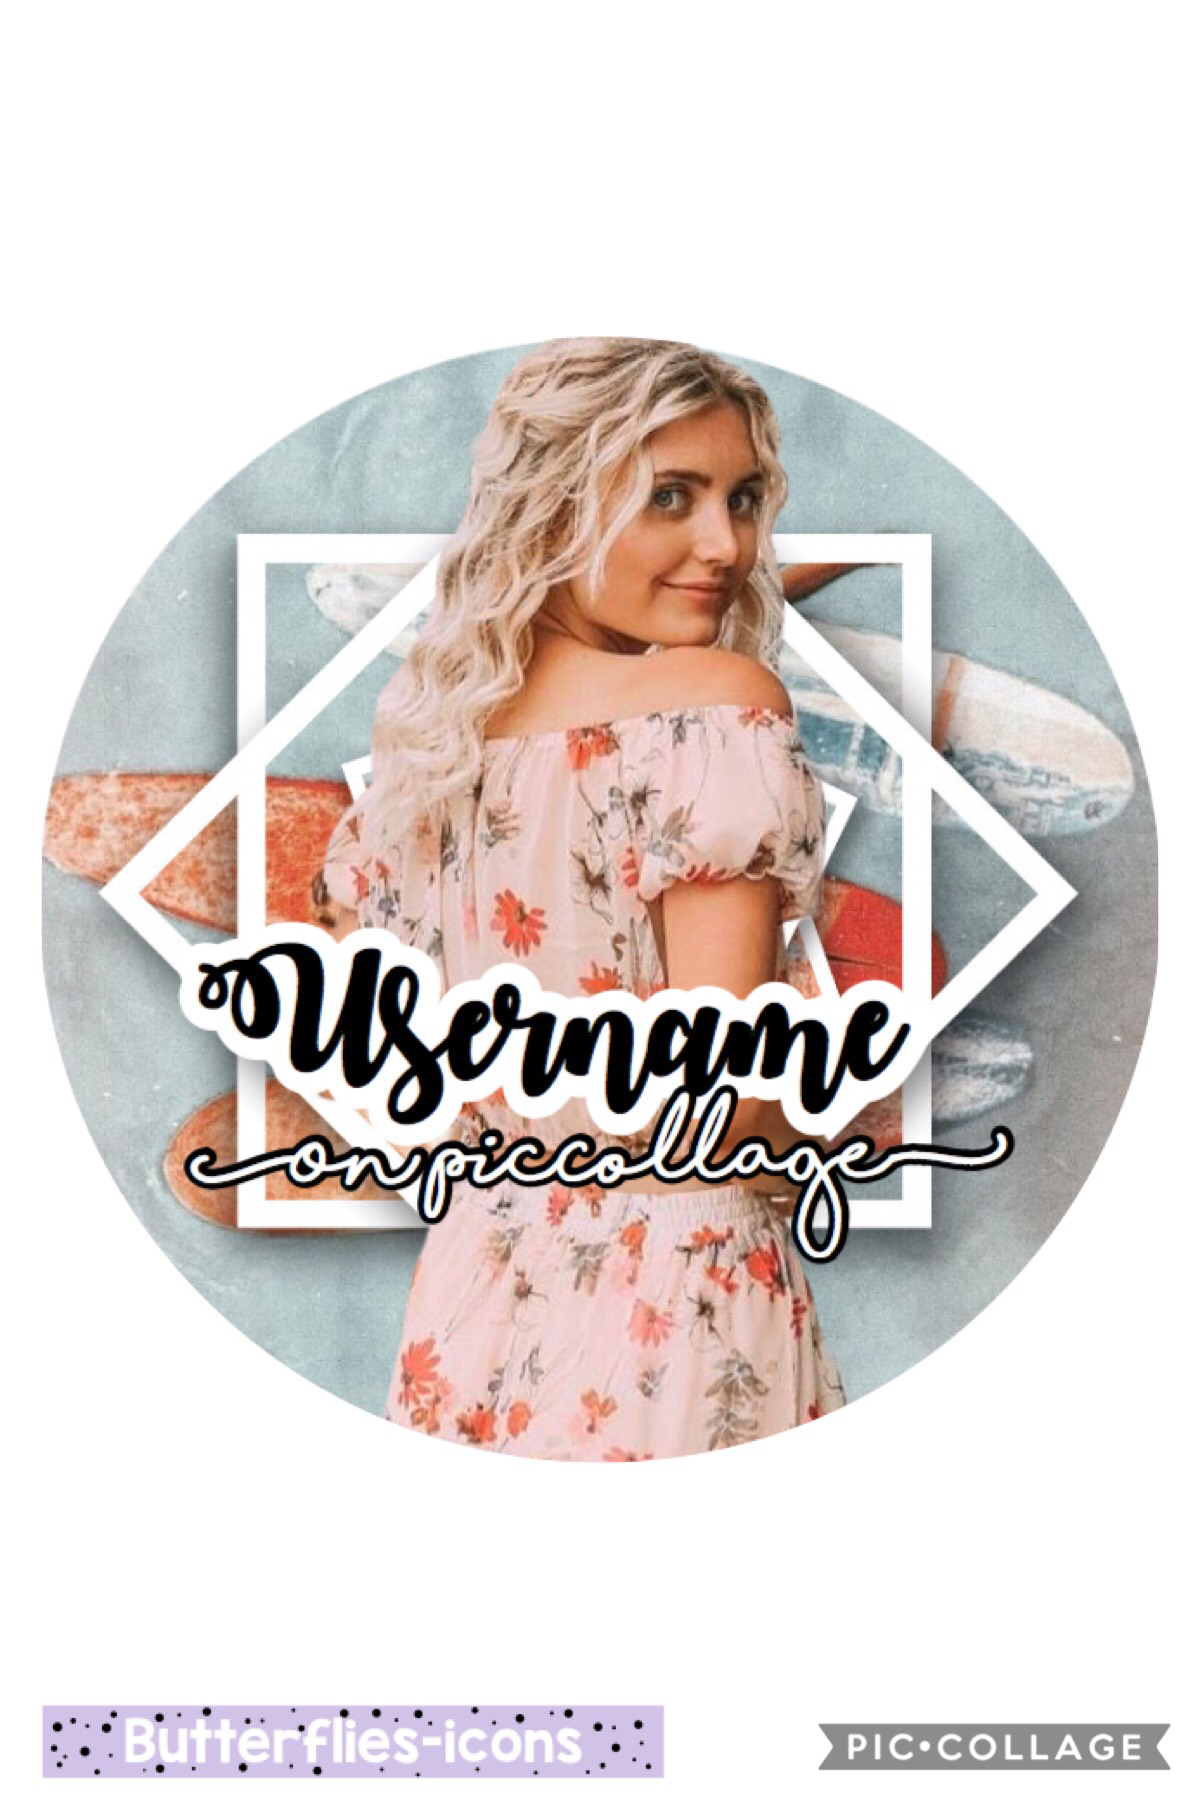 tap

🦋 hello gorgeous people! if you guys like this icon and if you would like your username on it just ask and i’d be more than happy to put it in there 🦋
